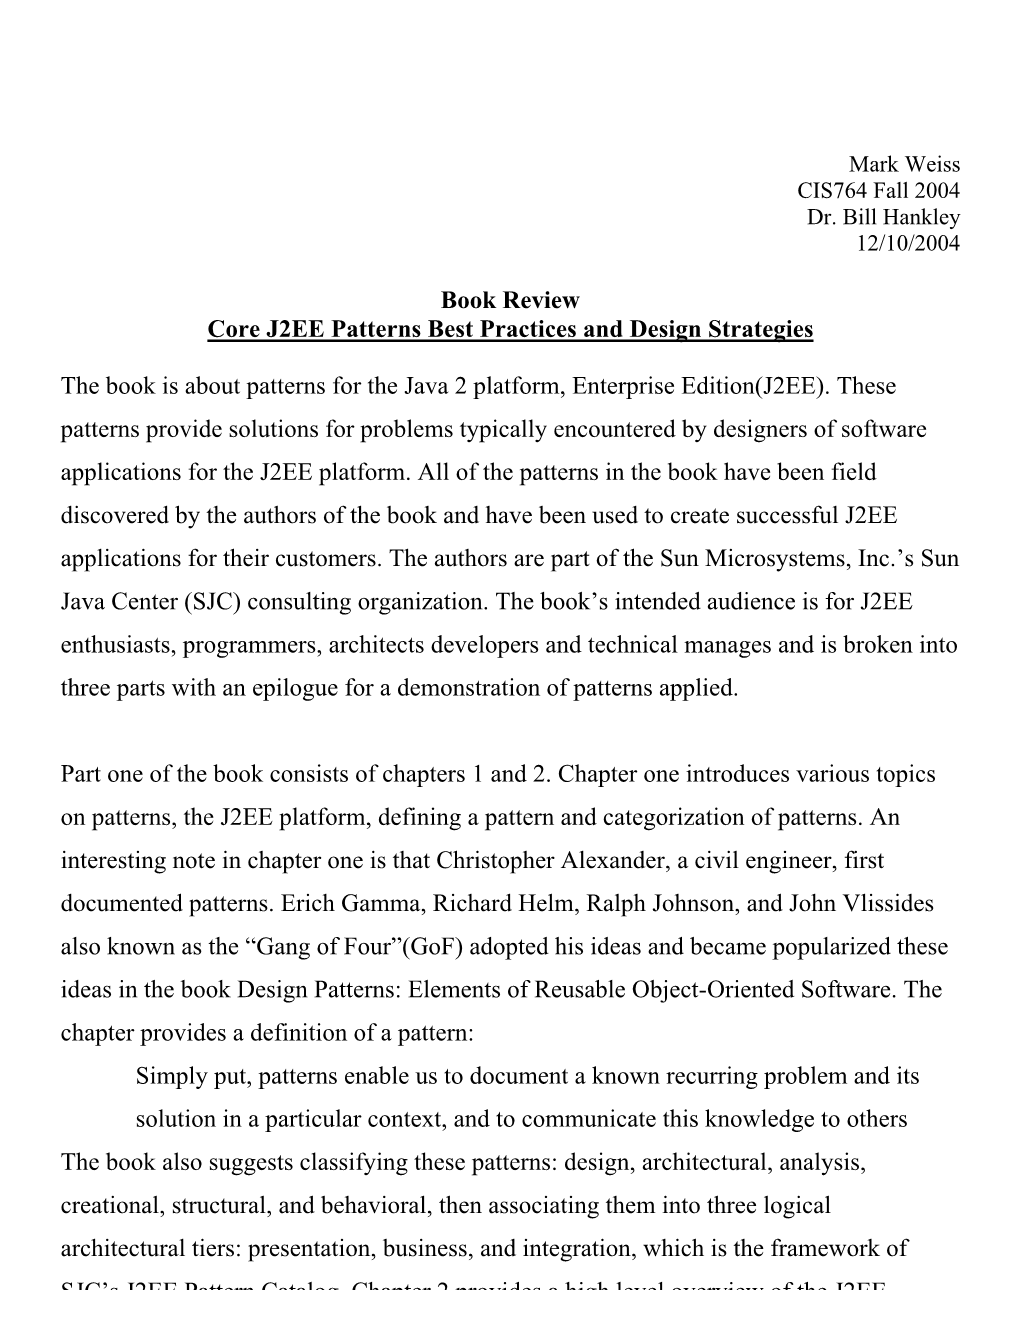 Book Review Core J2EE Patterns Best Practices and Design Strategies